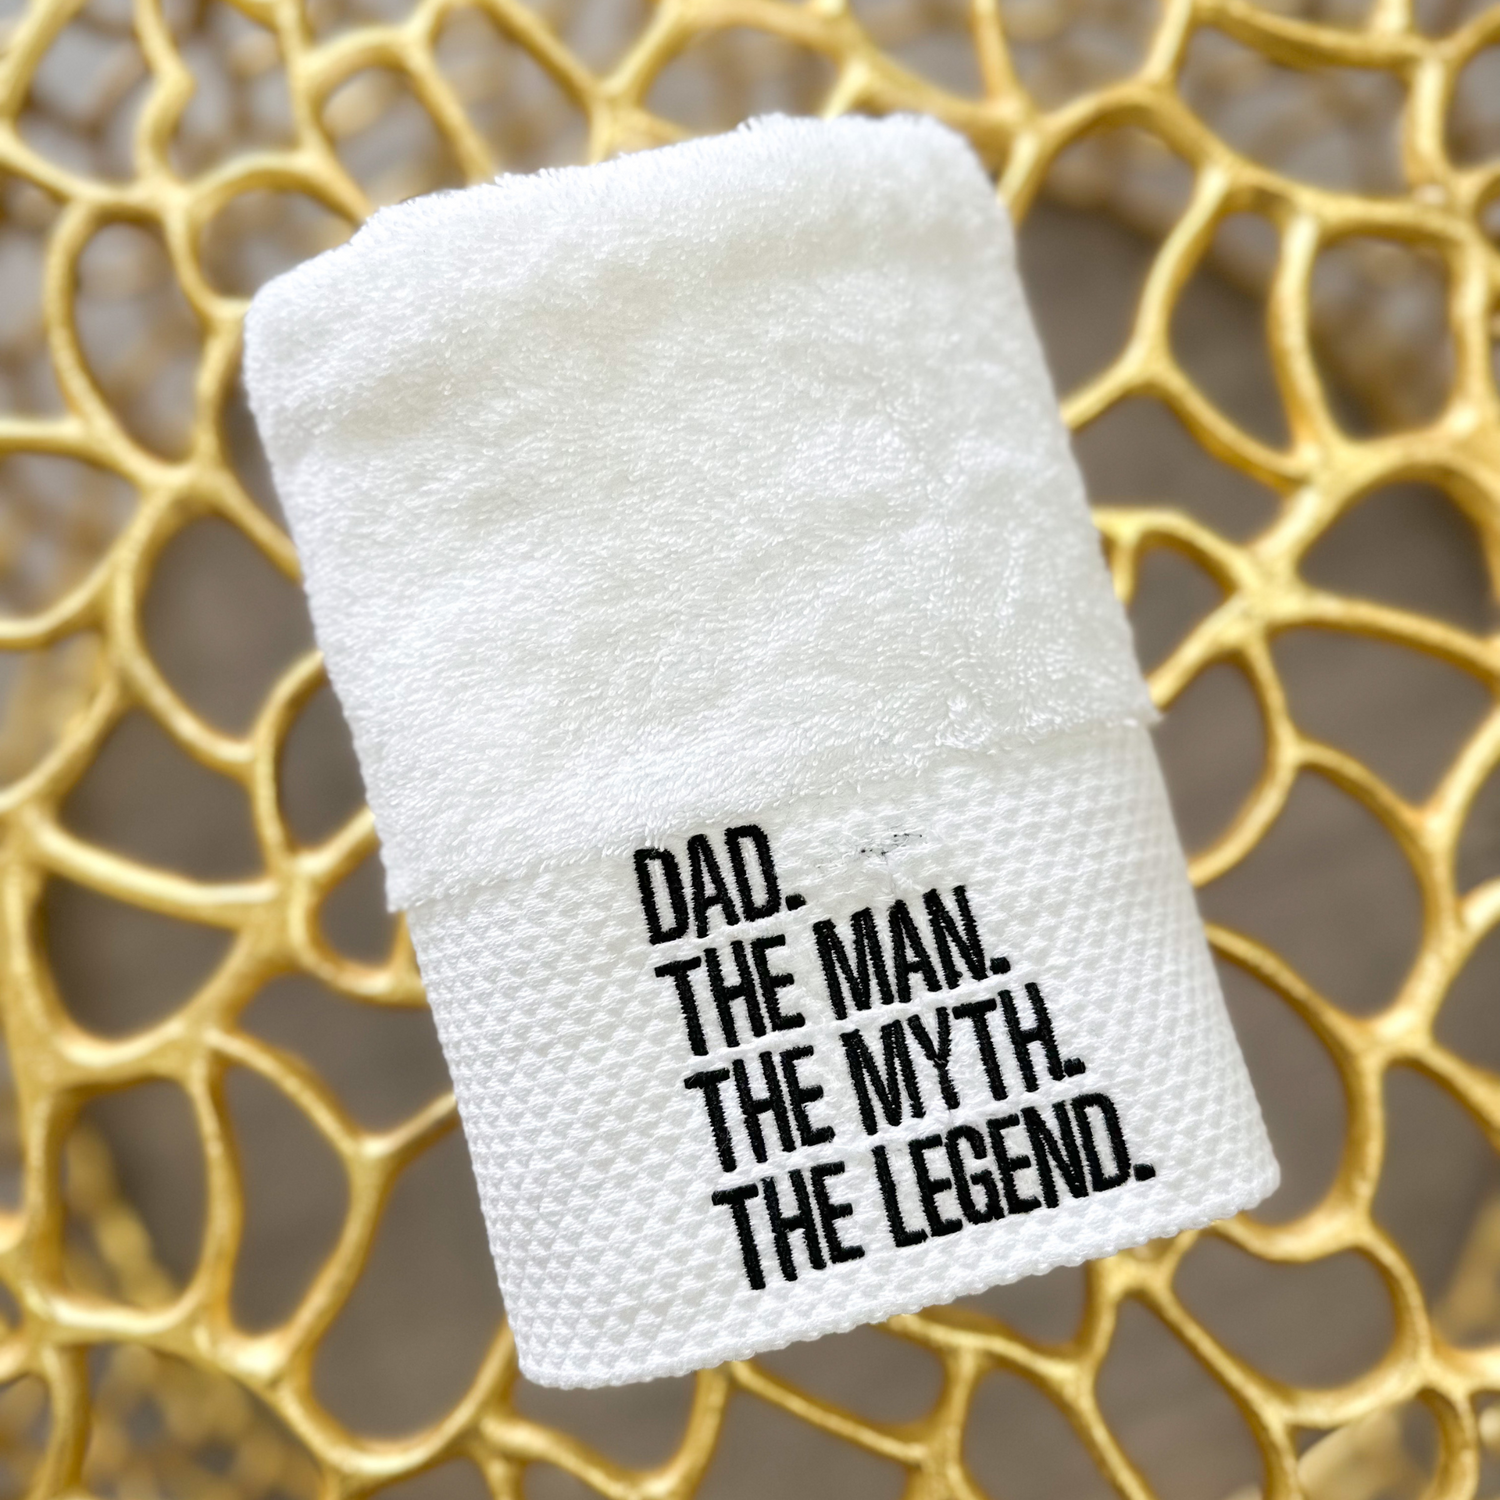 American Comfort "The Man. The Myth. The Legend." Custom Embroidered Hand Towel for Dad - American Comfort Luxury Linens